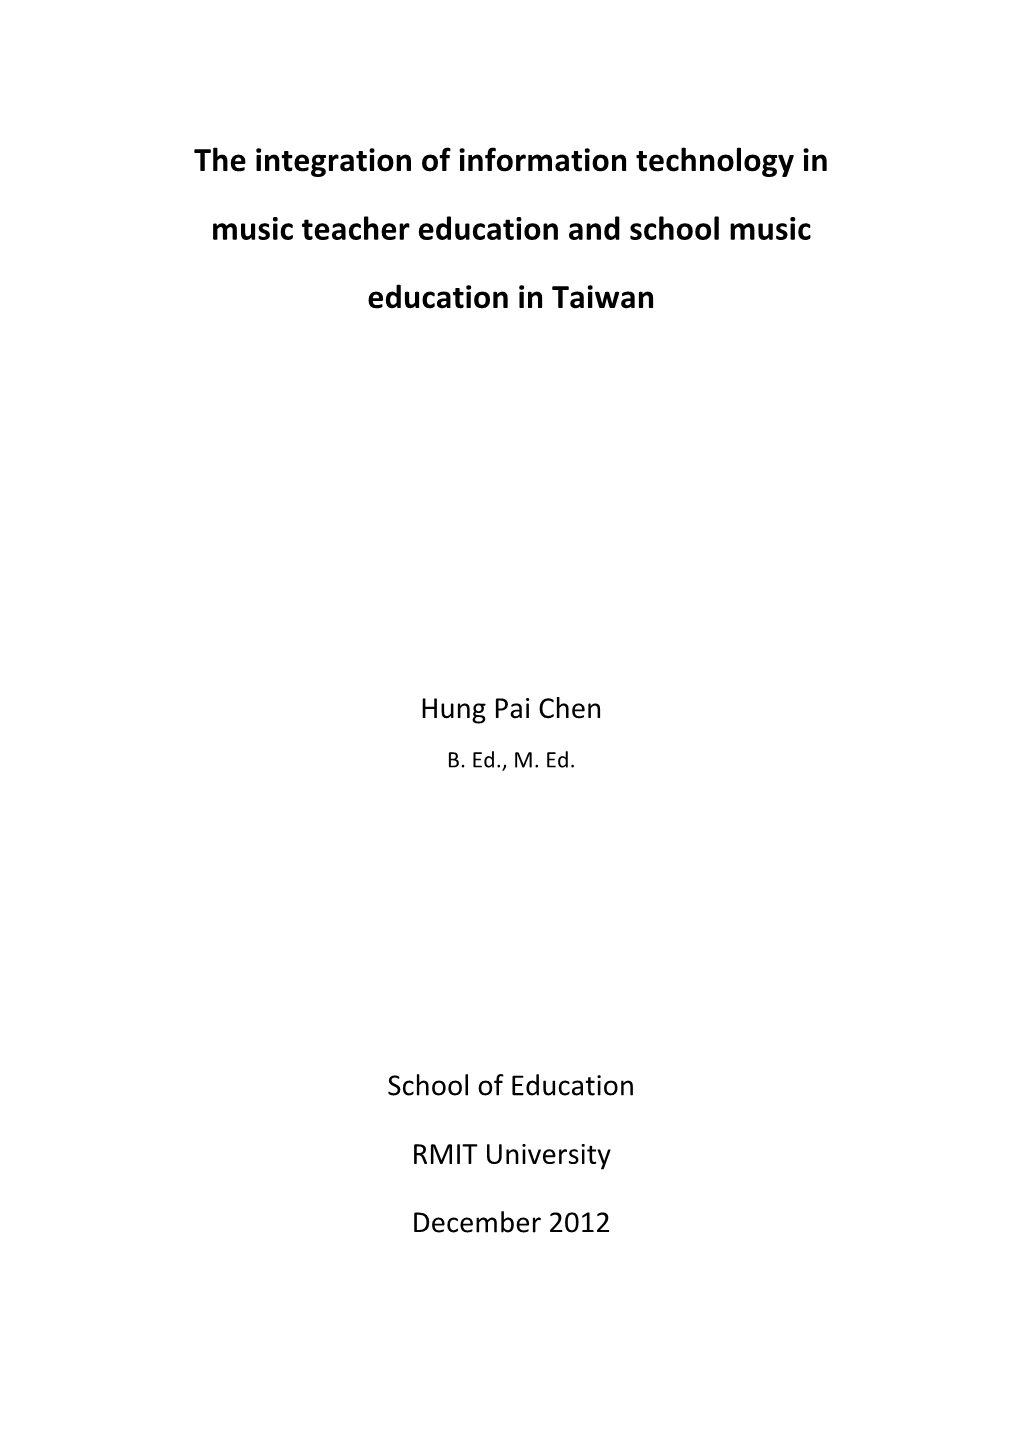 The Integration of Information Technology in Music Teacher Education and School Music Education in Taiwan: a Conceptual Framework